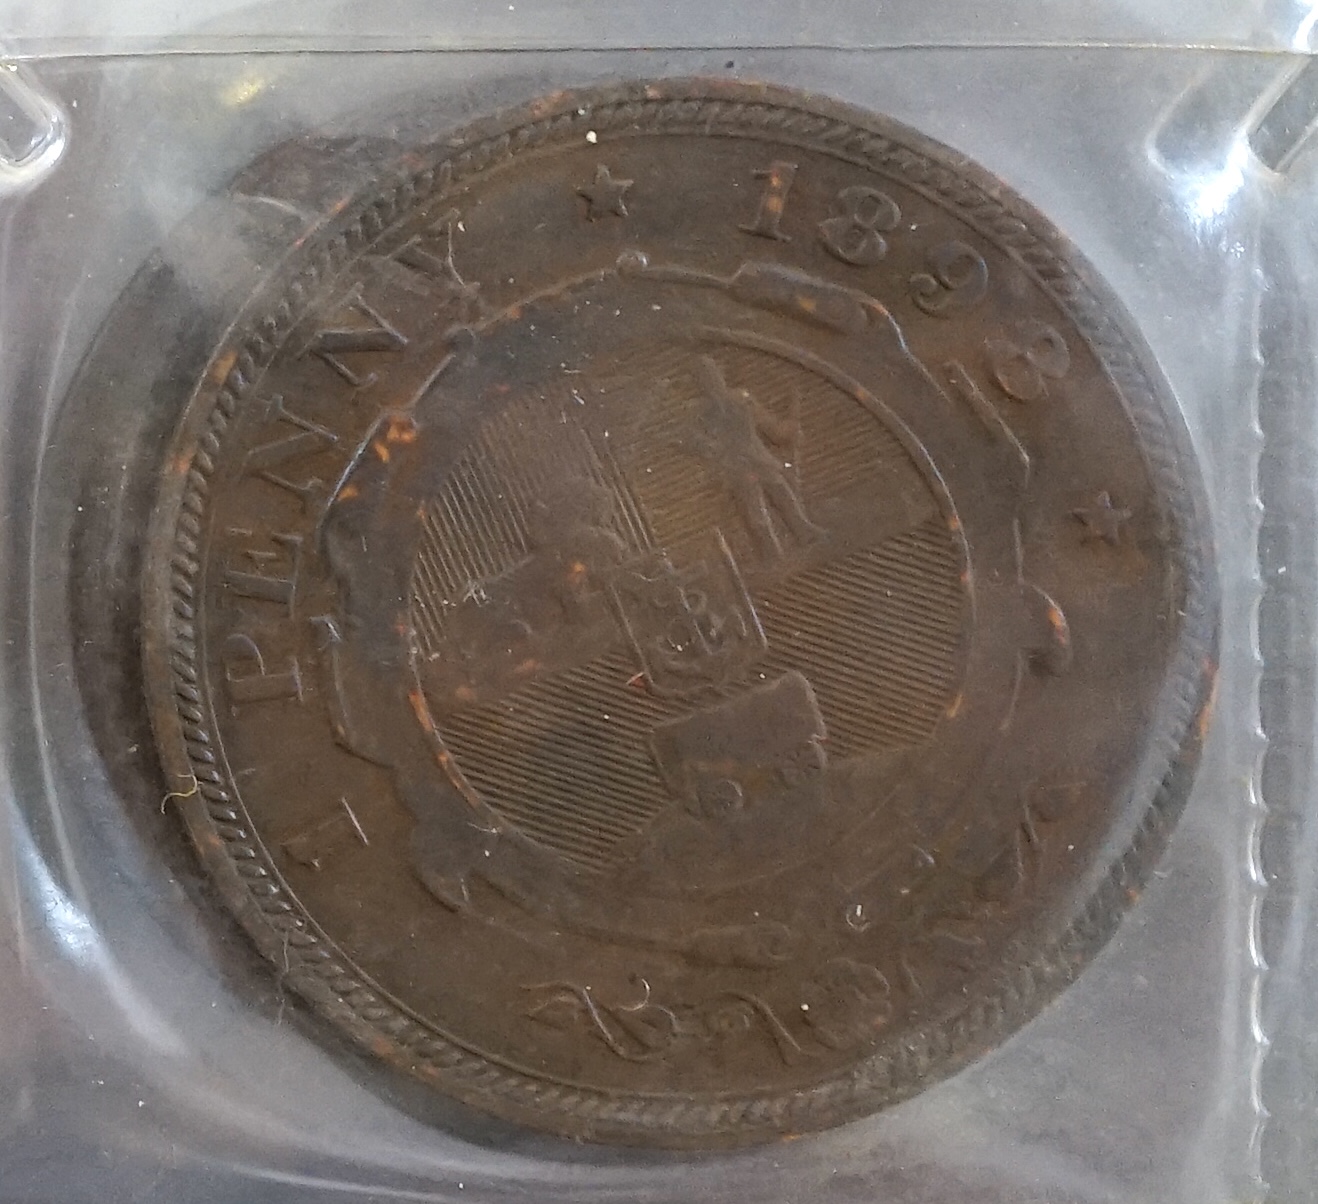 British and World coins, in an album and loose, together with banknotes, highlights include George V halfcrown 1923, about EF, and various pre-1947 silver coins